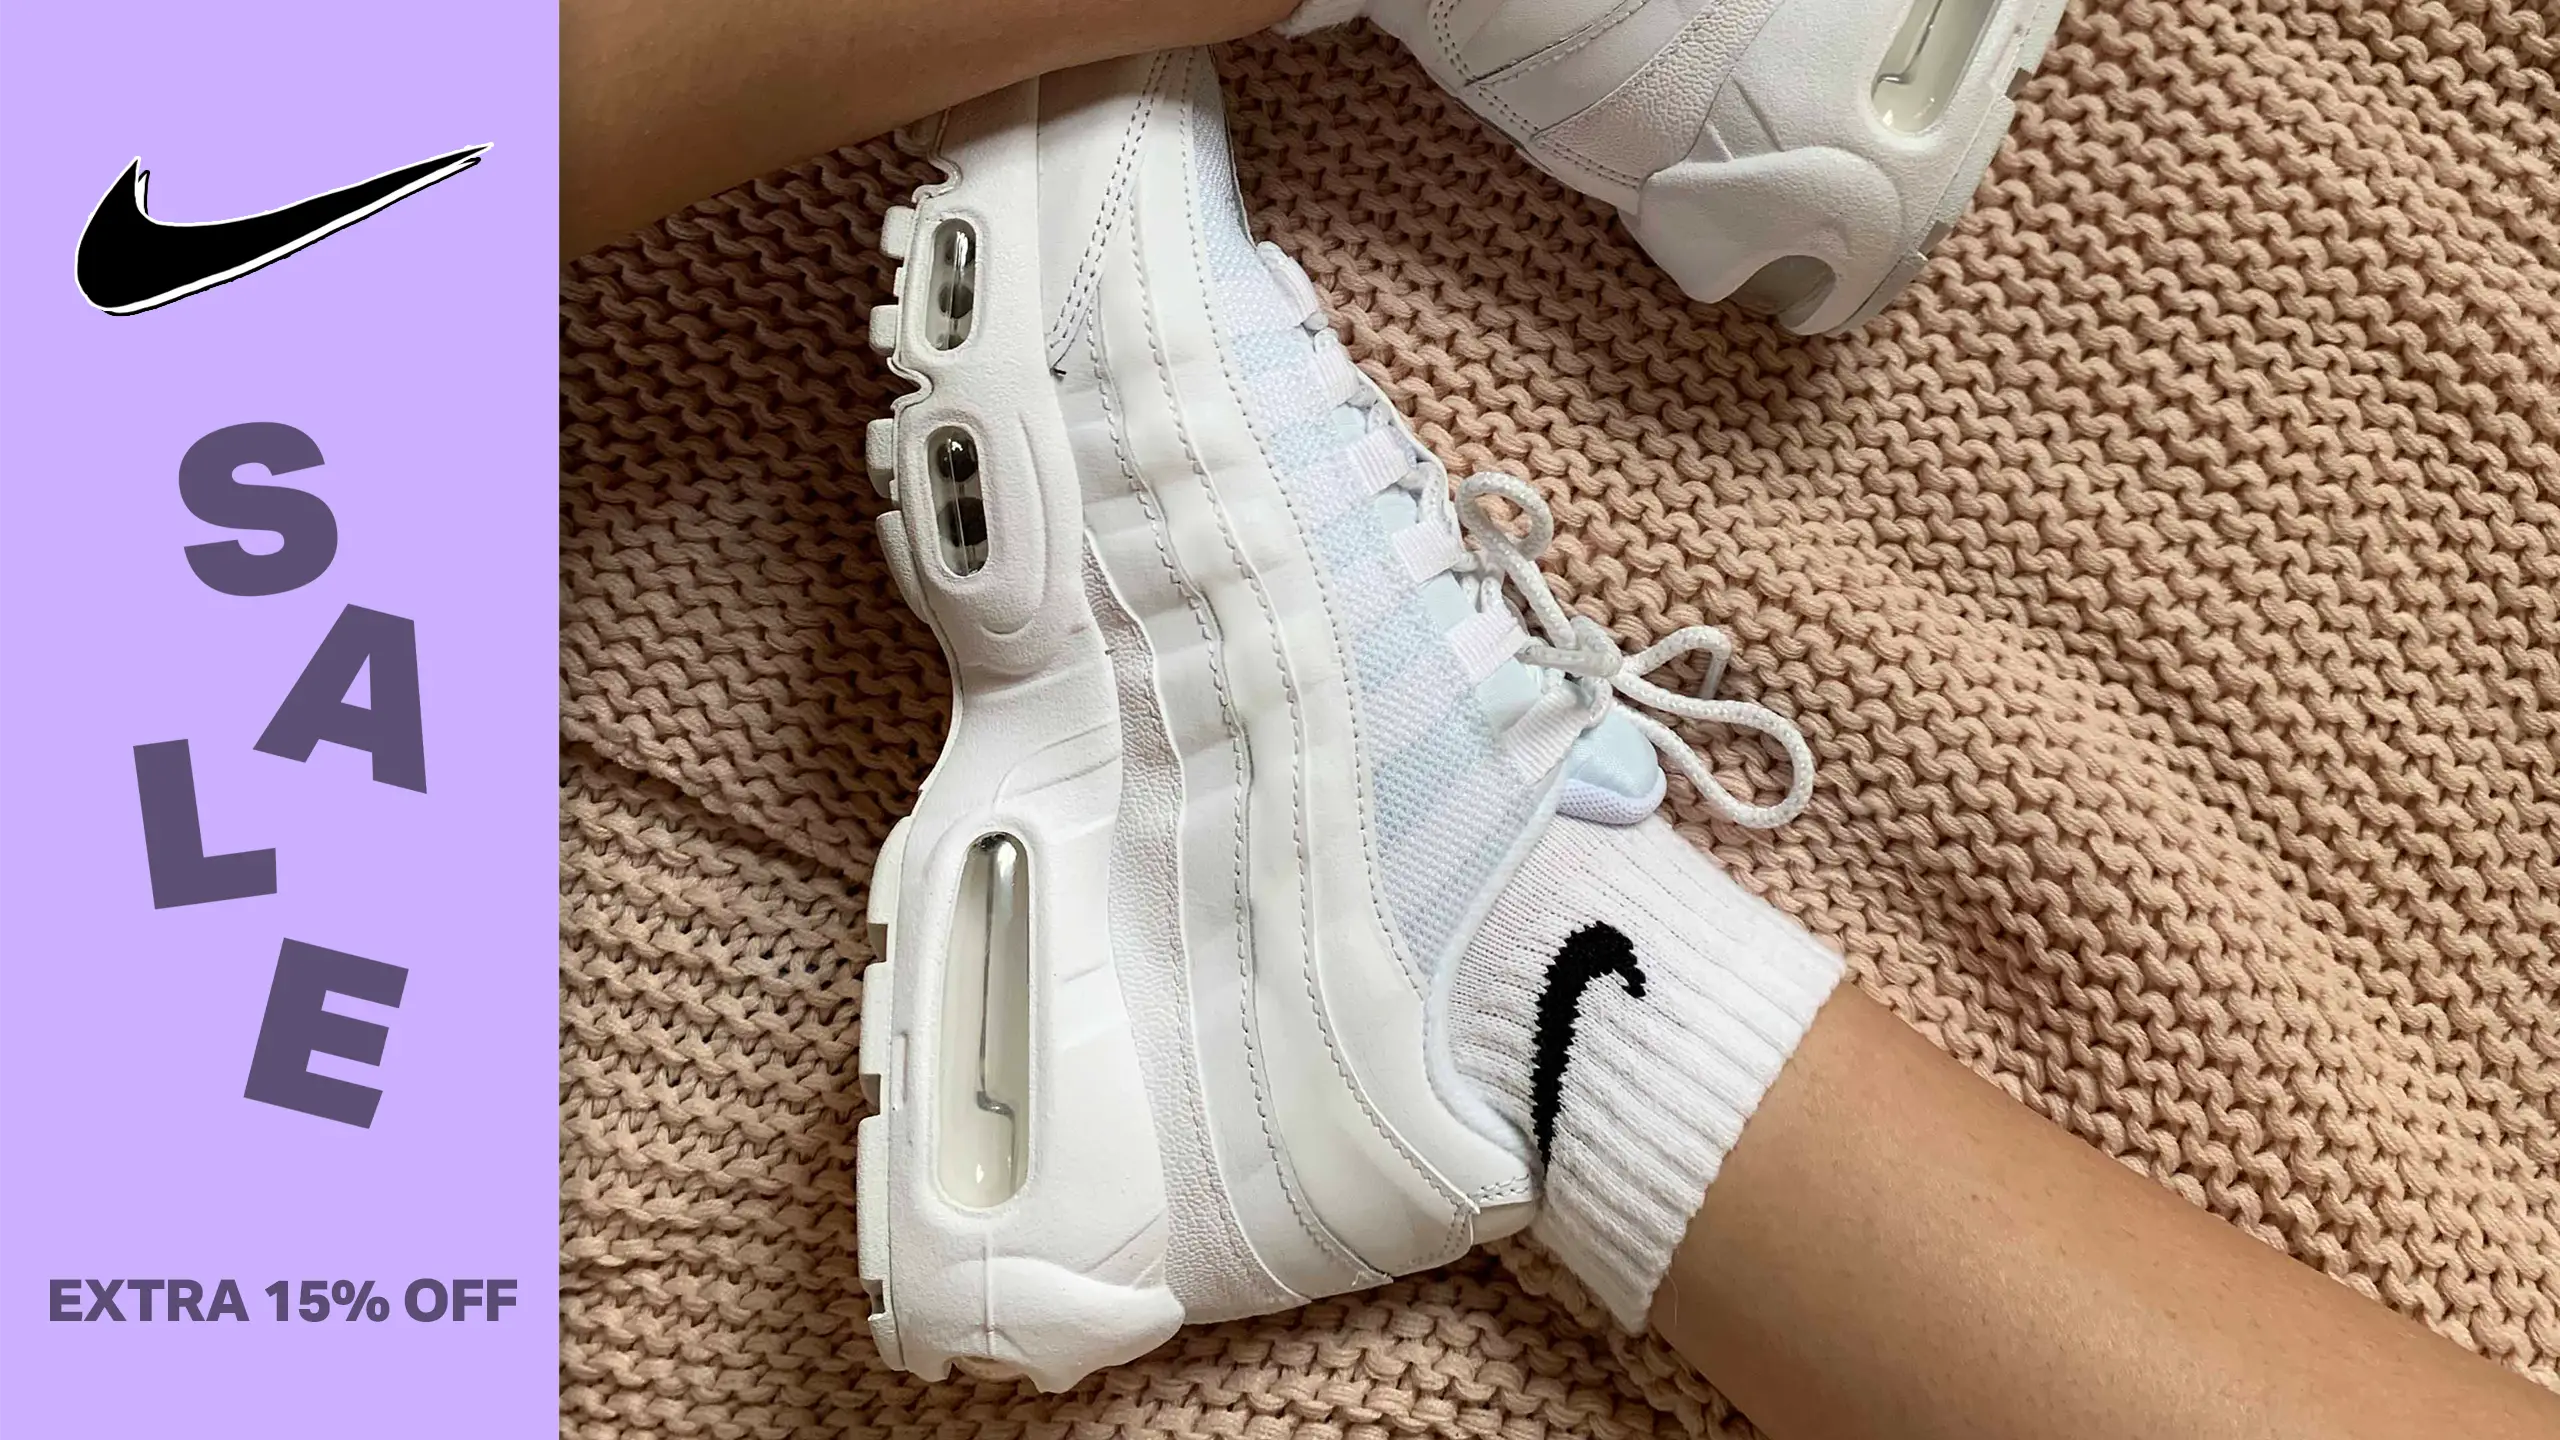 Cop This Crisp-White Nike Air Max 95 For Only £50 With This Code | The ...